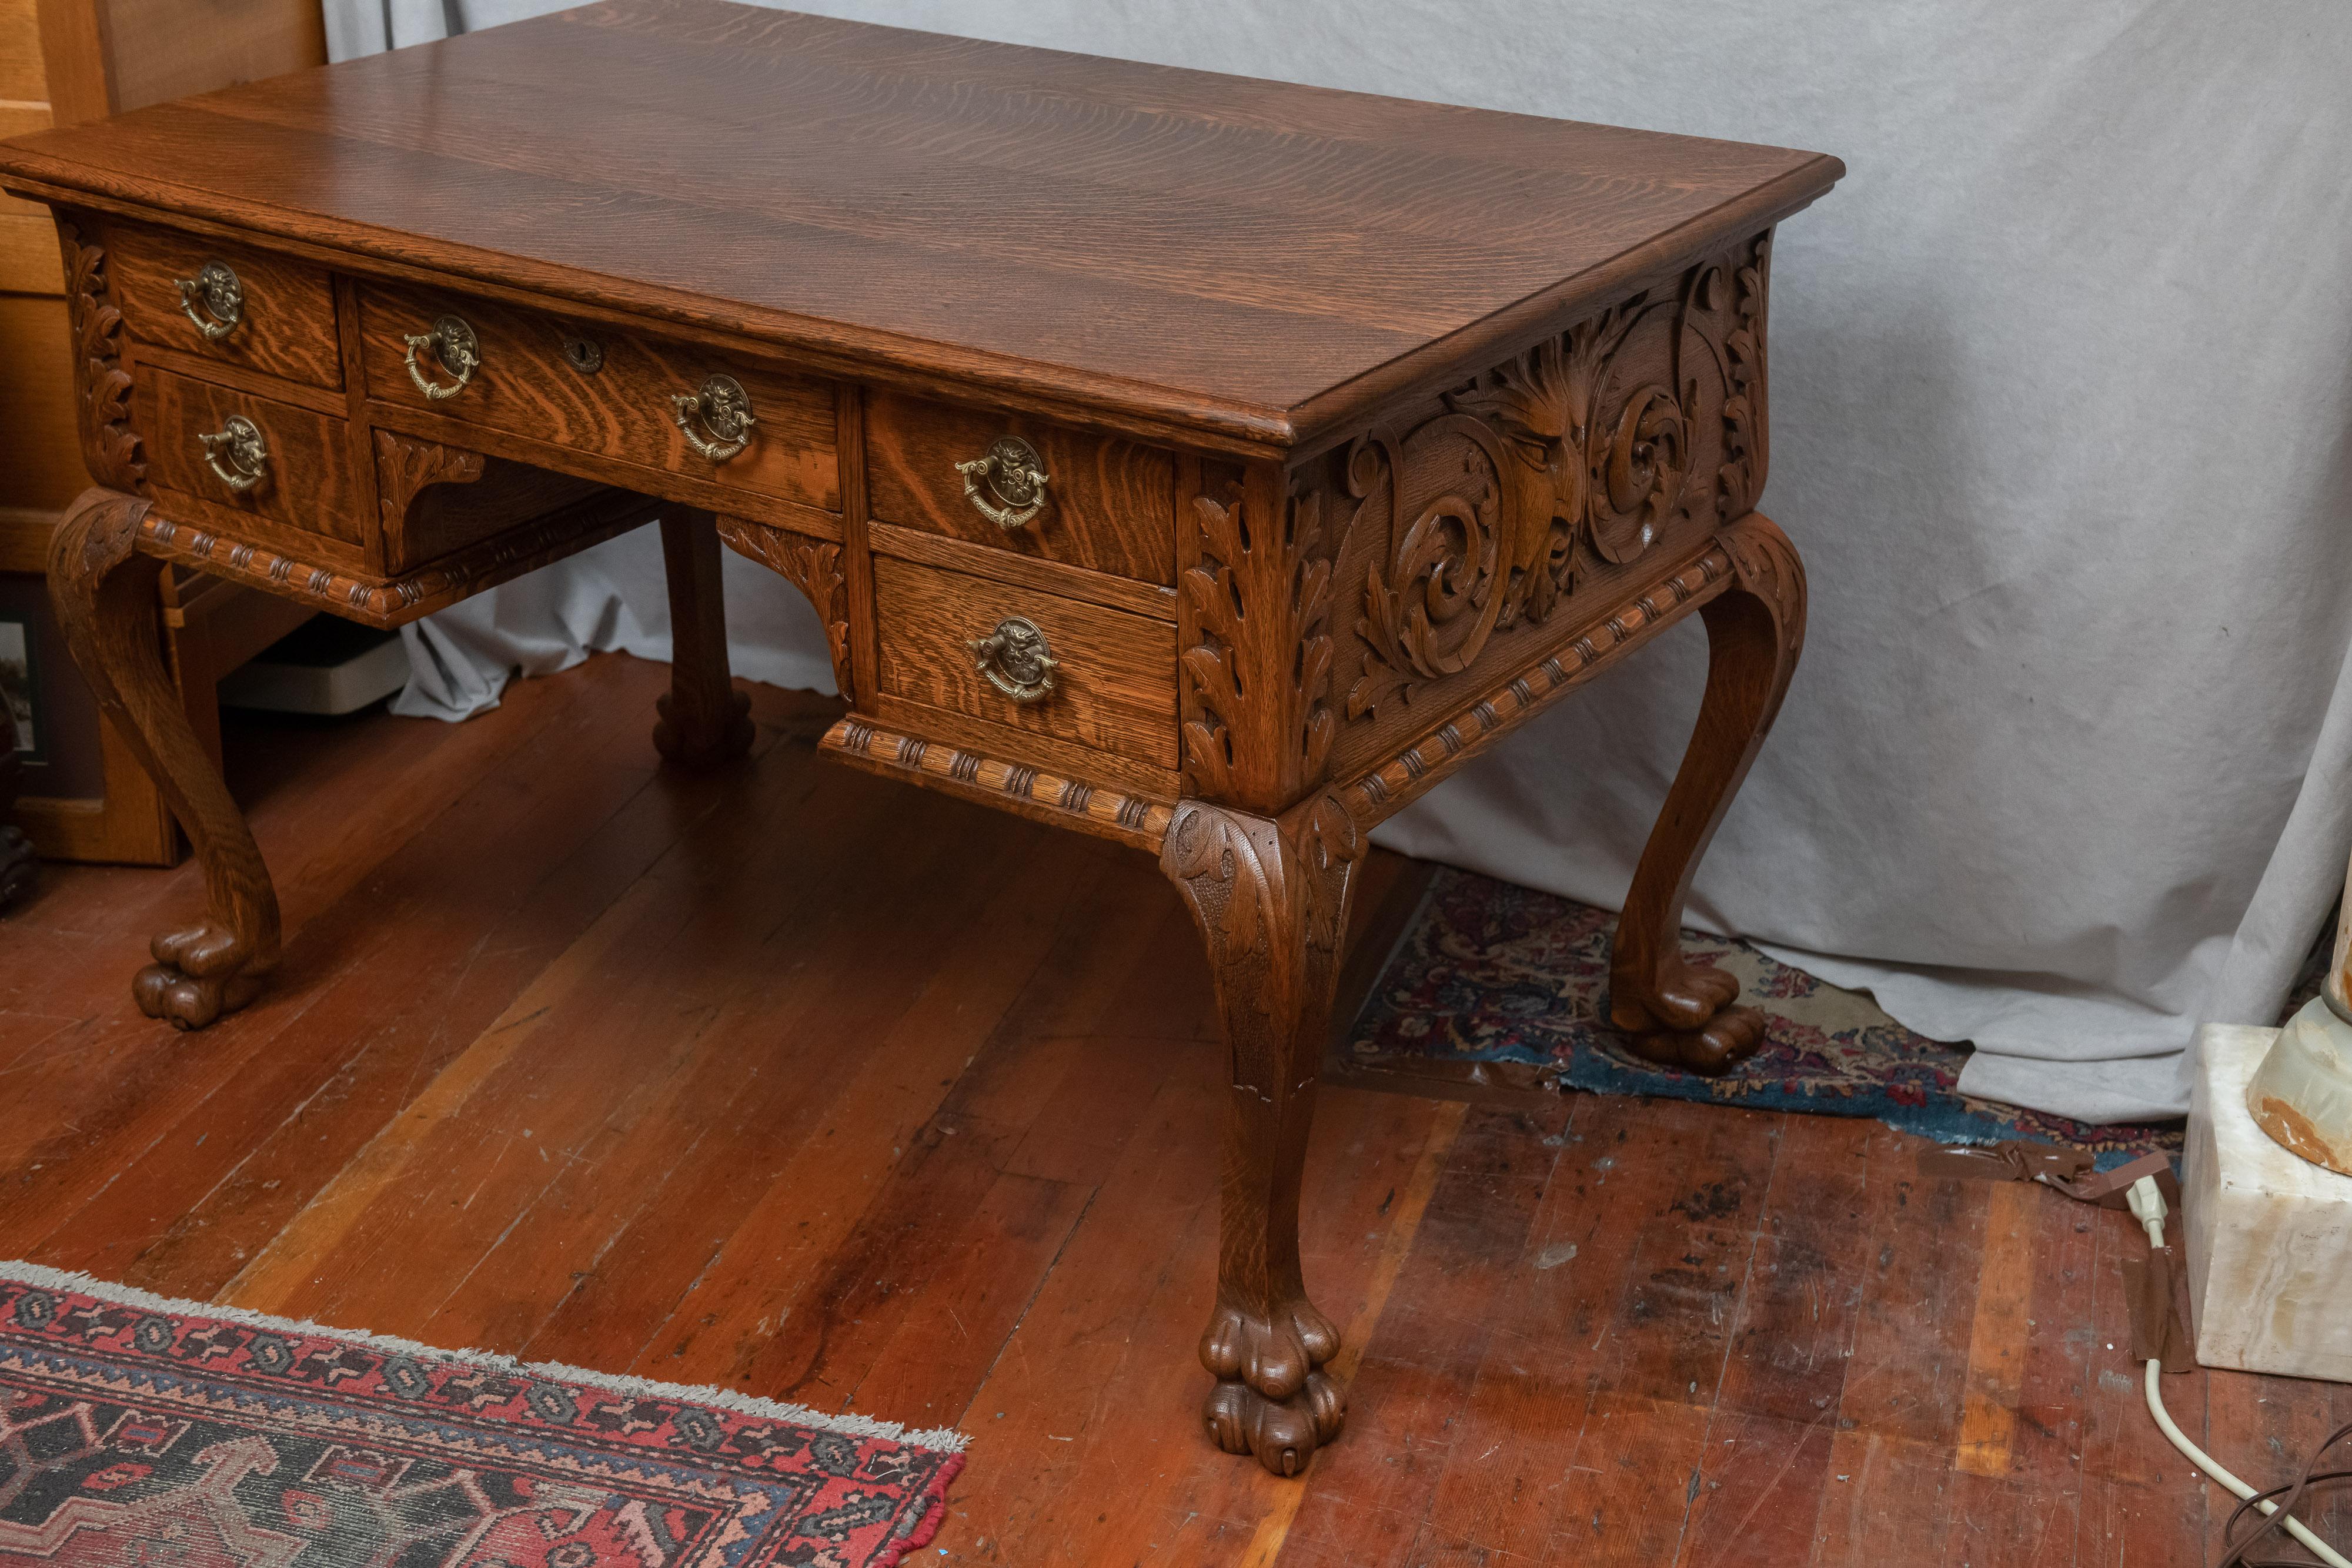 Late Victorian Carved American Tiger Oak Partner's Desk. It's hard to imagine a better example of this style desk. The carving is crisp, the oak is the best cut, the brass handles are special, and even the drawer construction is top shelf. The